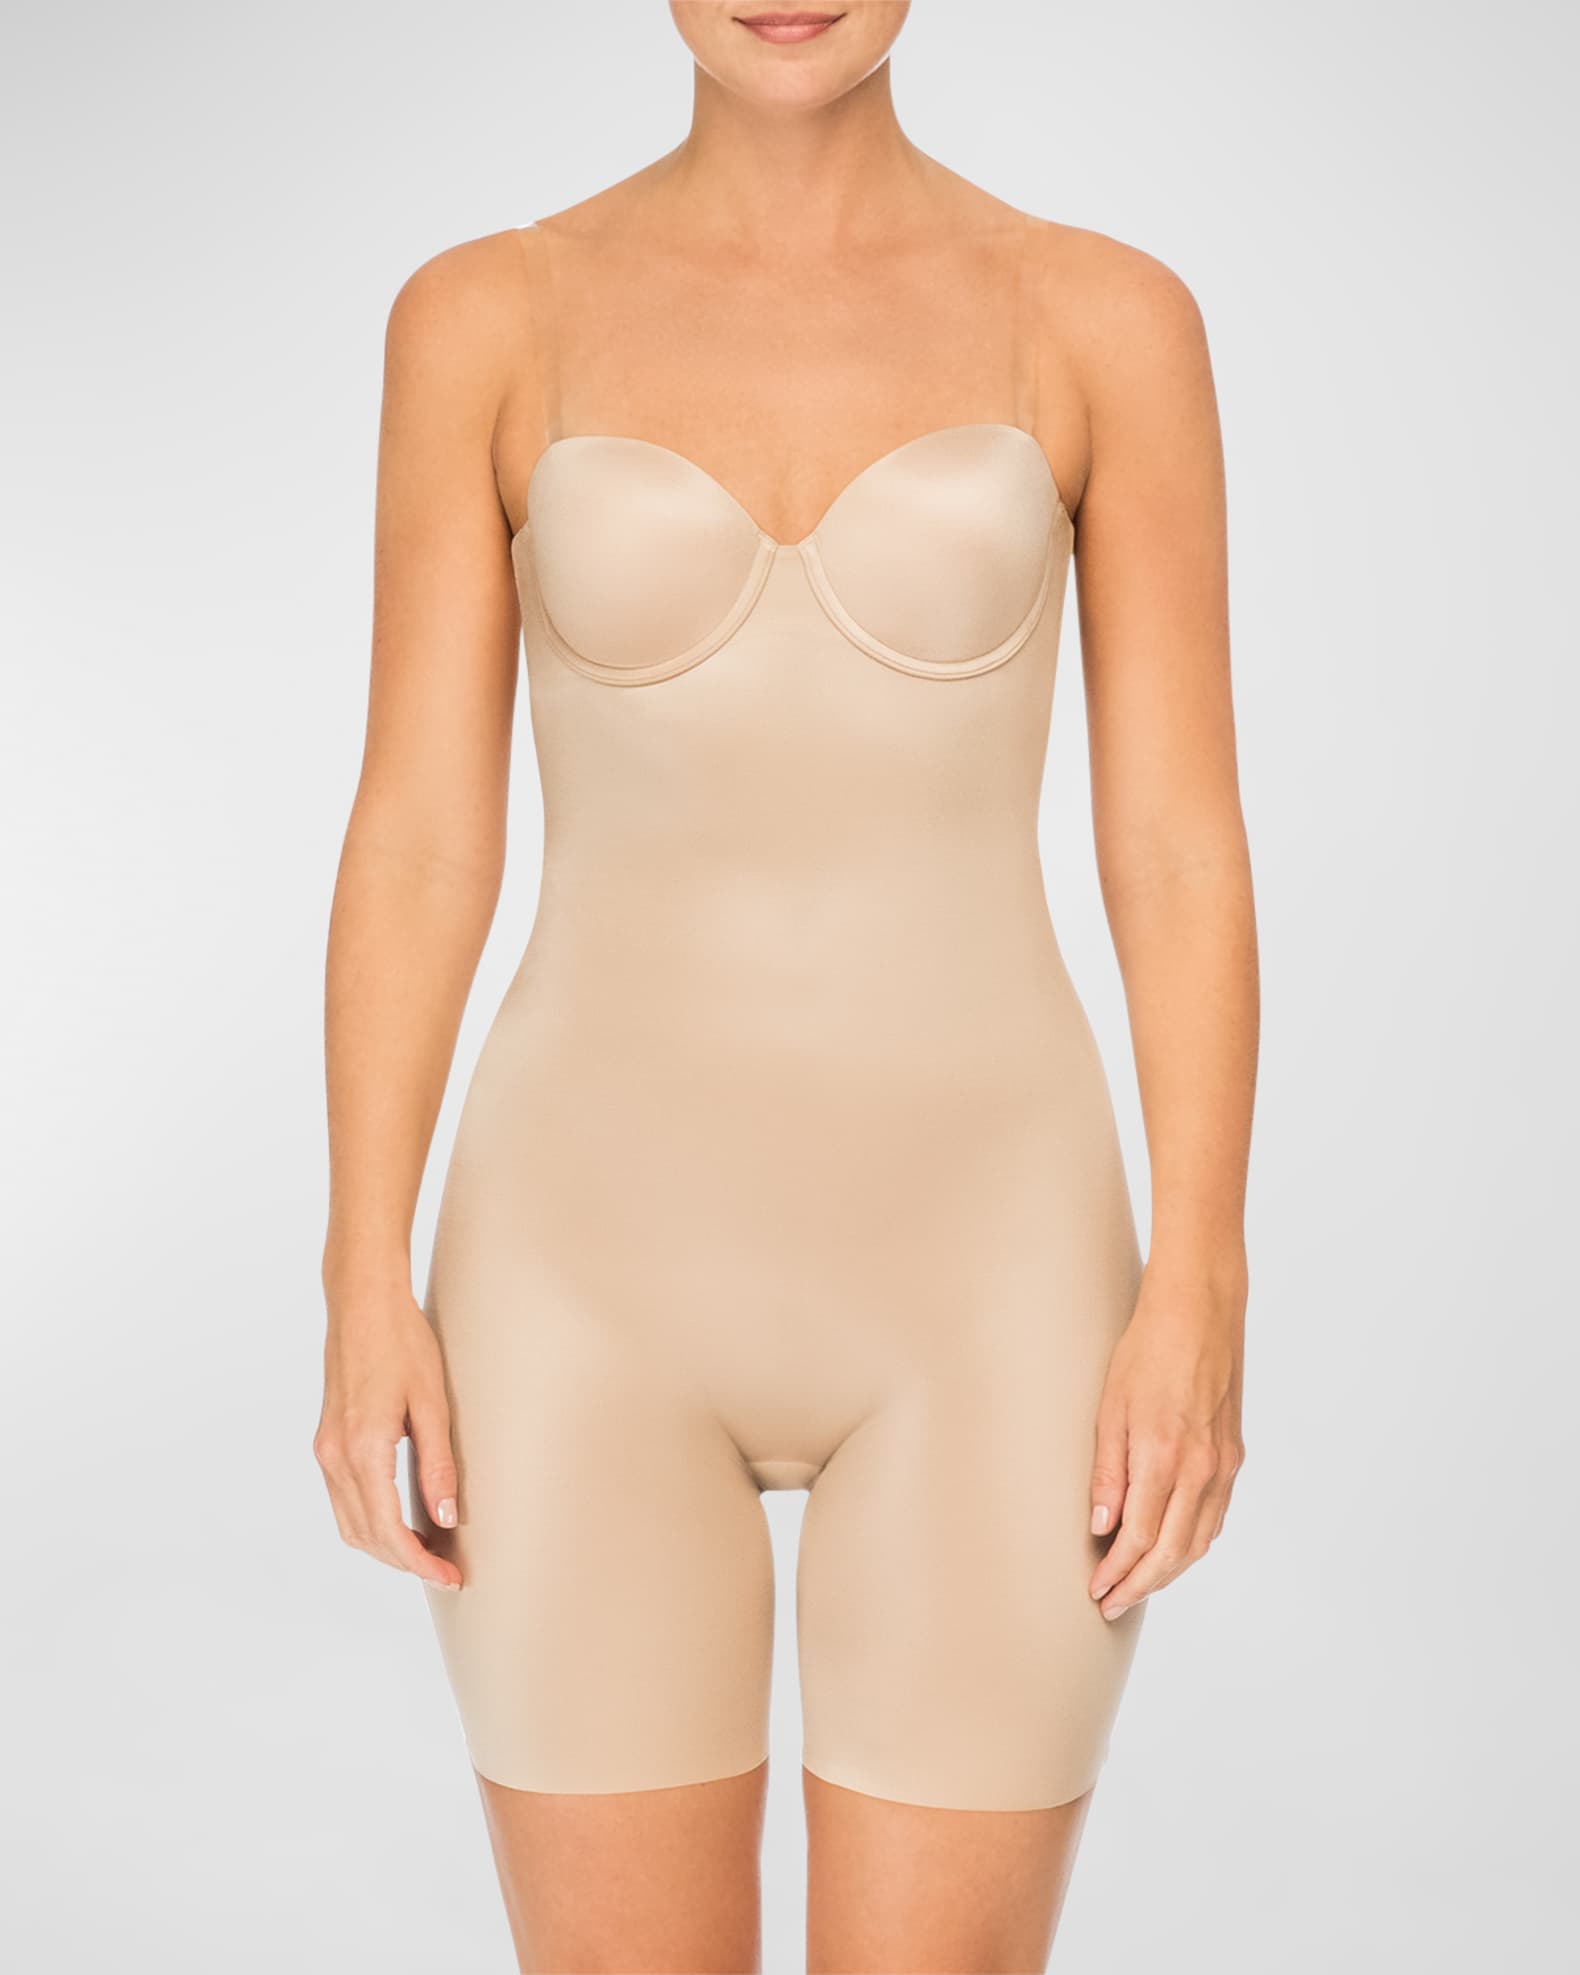 Assets by SPANX Women's Strapless Cupped Midthigh Bodysuit. – Biggybargains